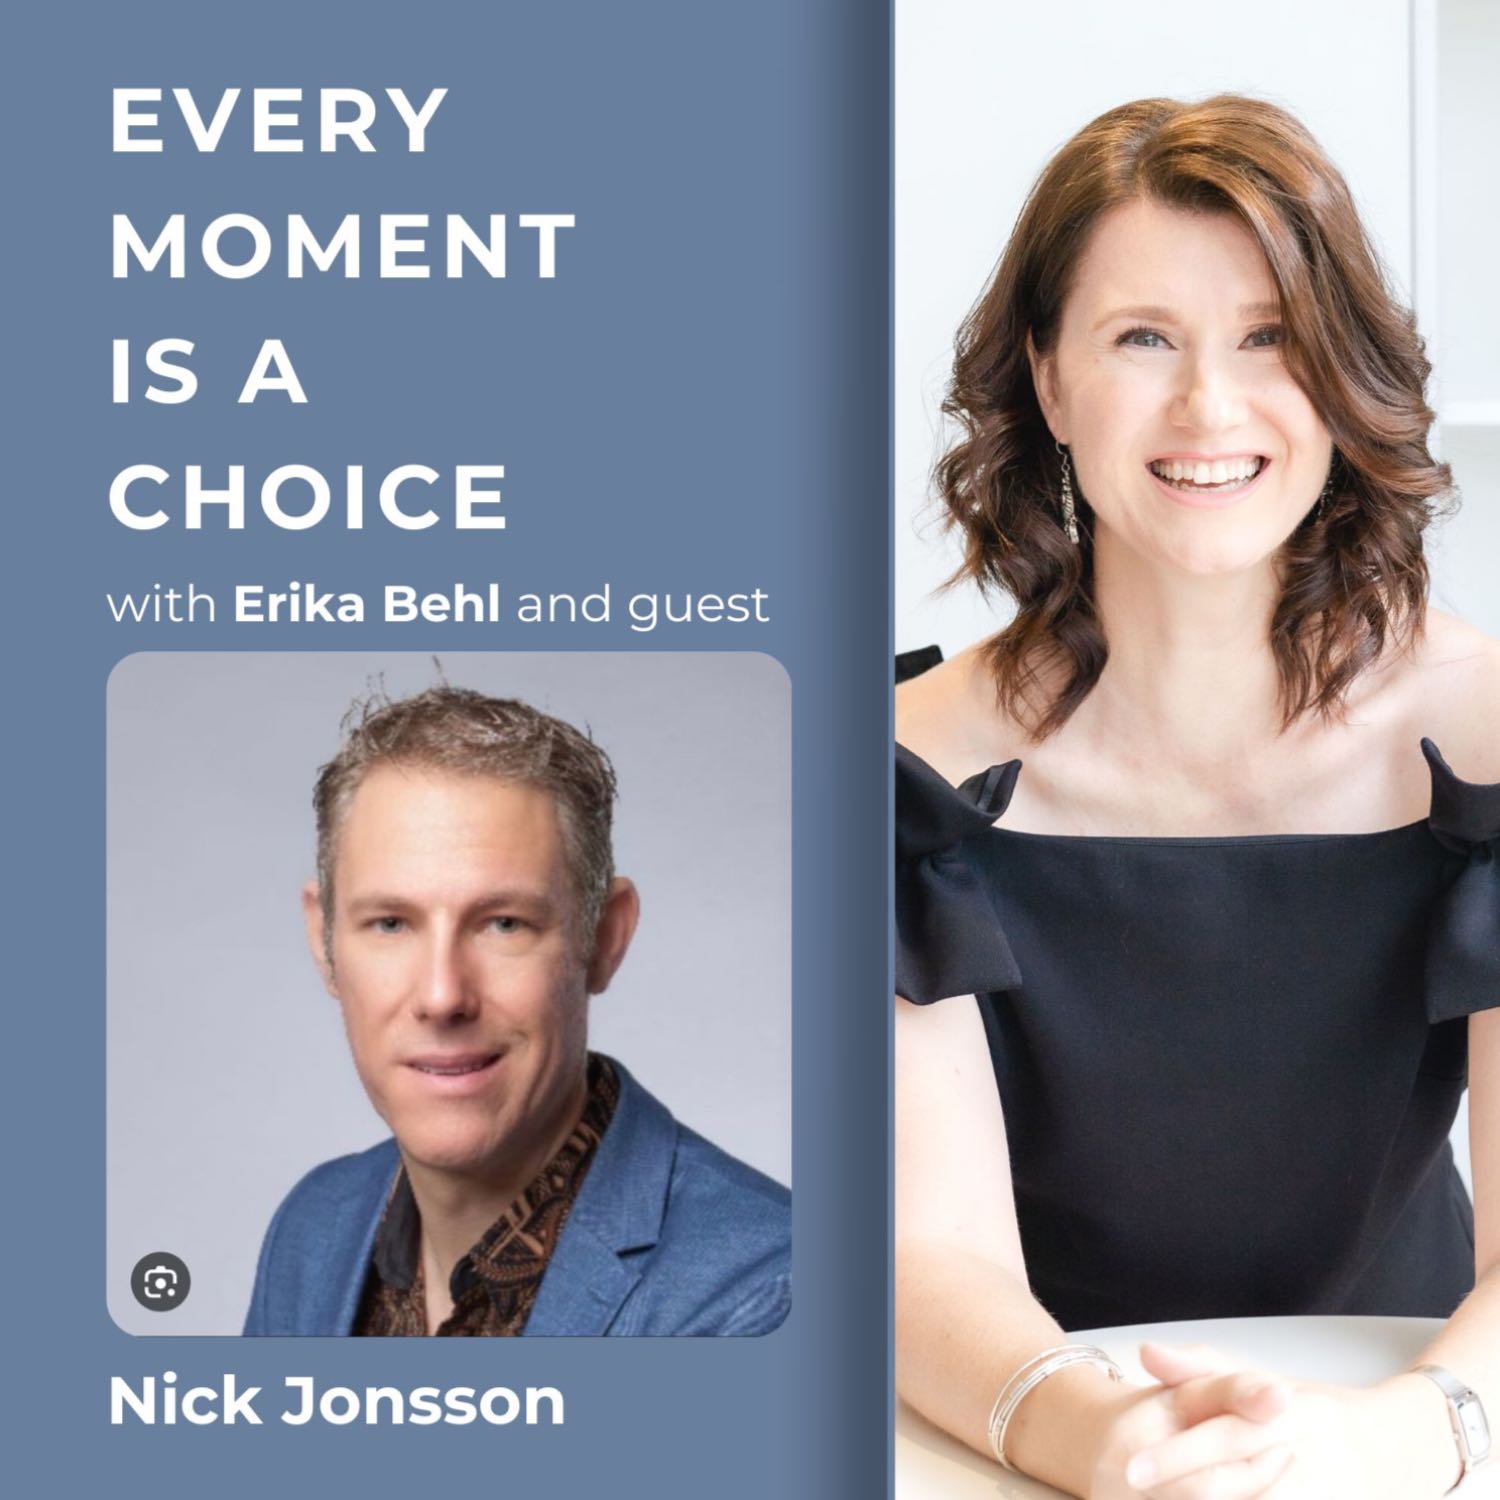 Executive Loneliness: Overcoming Addiction and Finding Purpose with Nick Jonsson